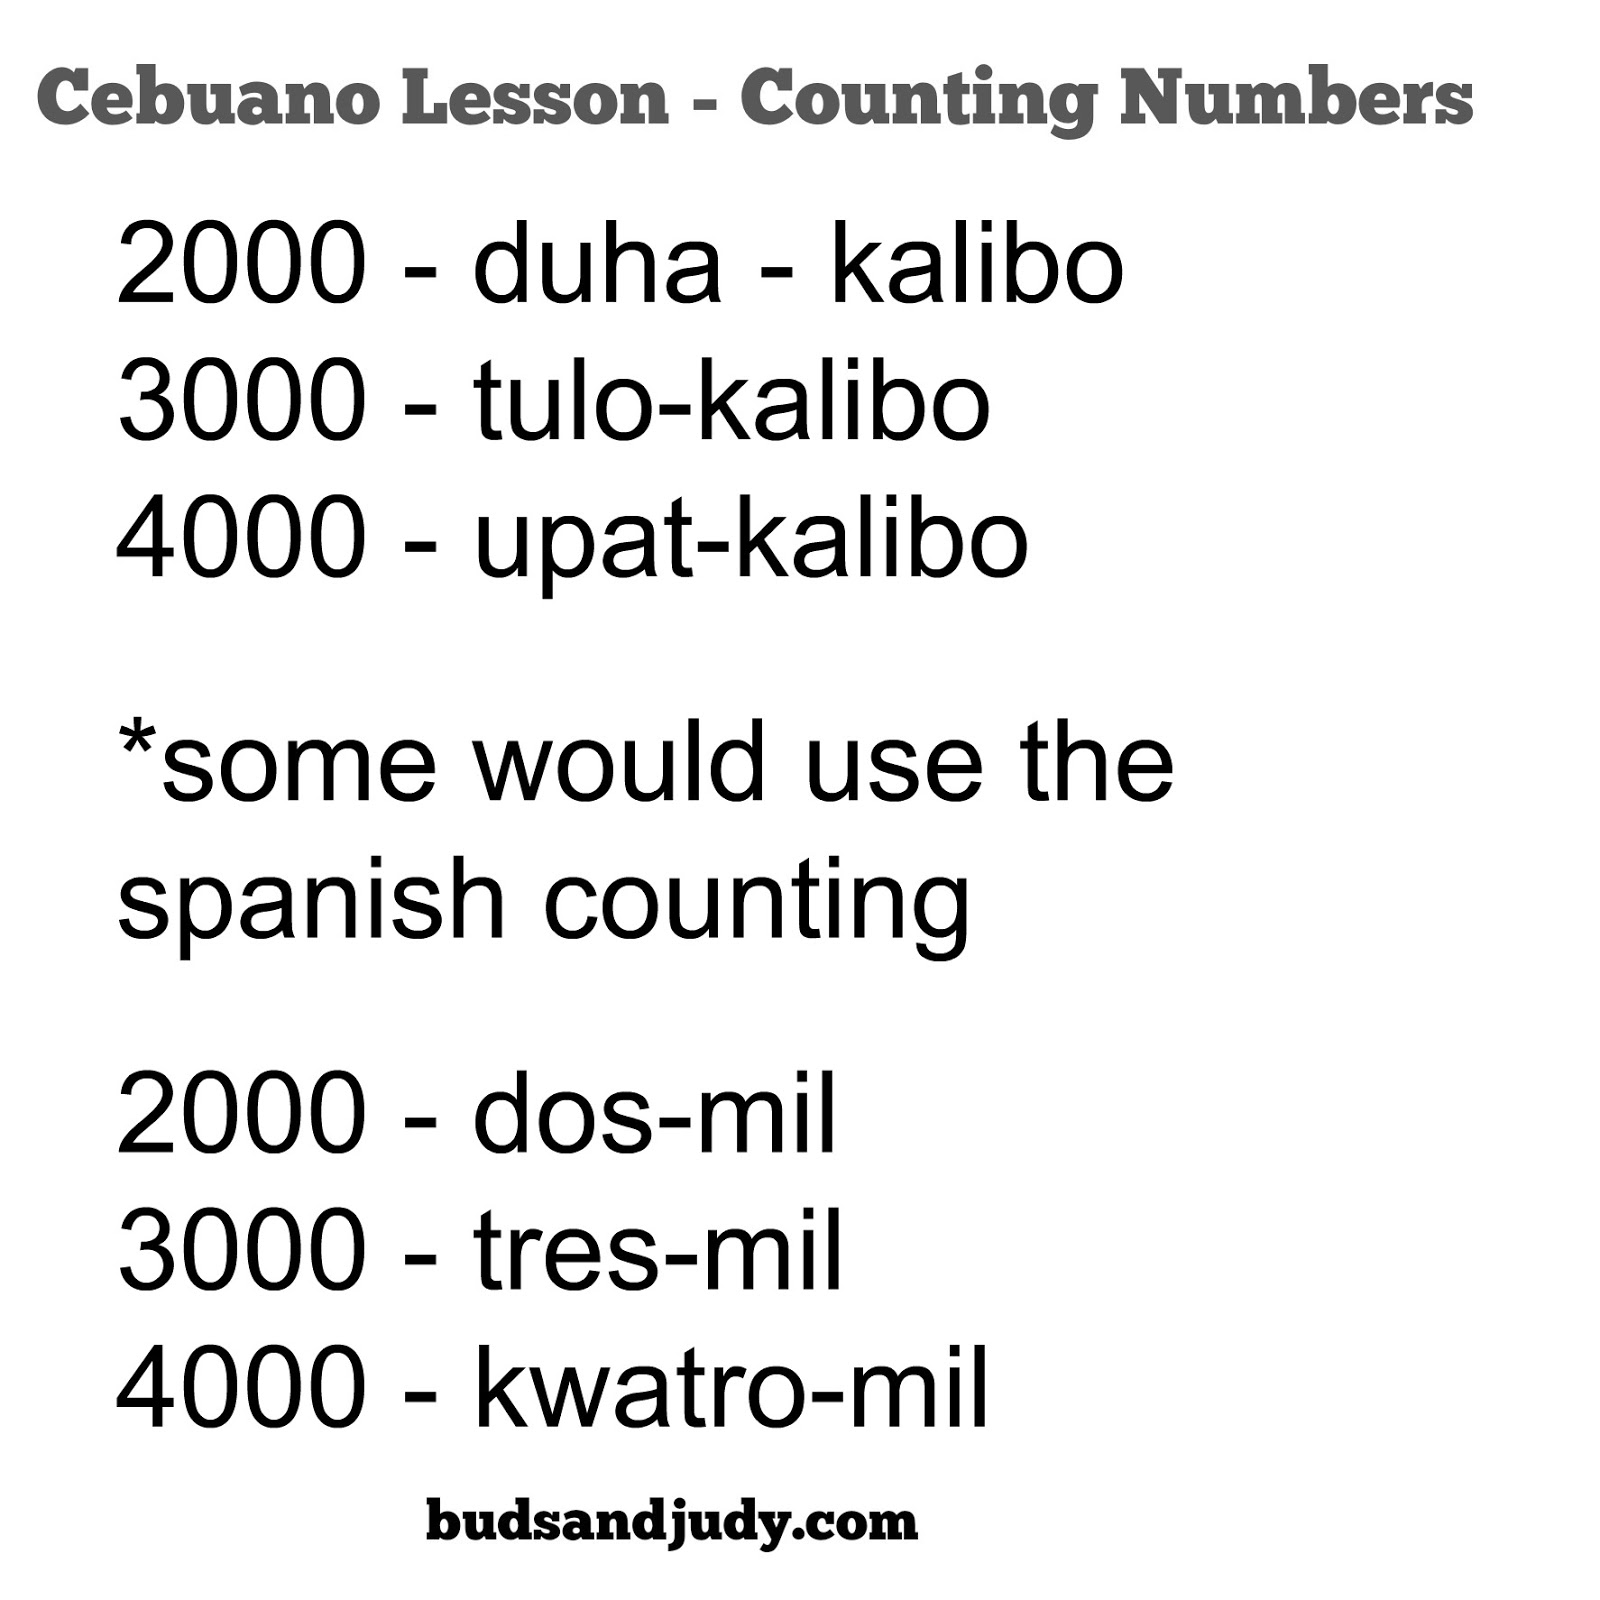 cebuano101-how-to-count-numbers-in-bisaya-or-cebuano